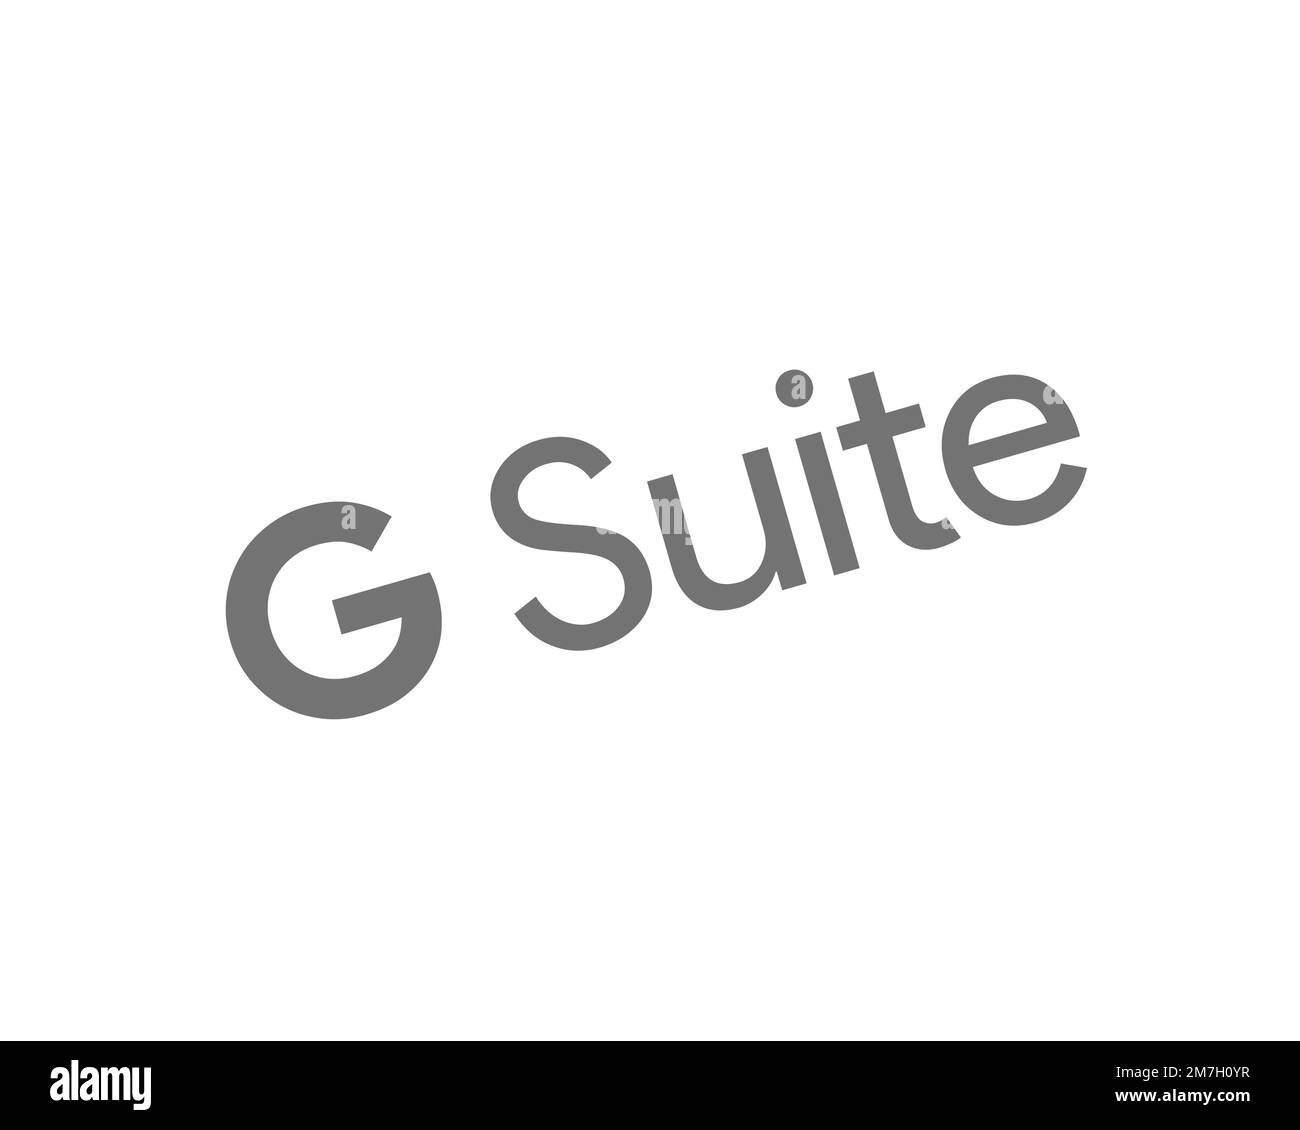 G Suite, rotated logo, white background Stock Photo